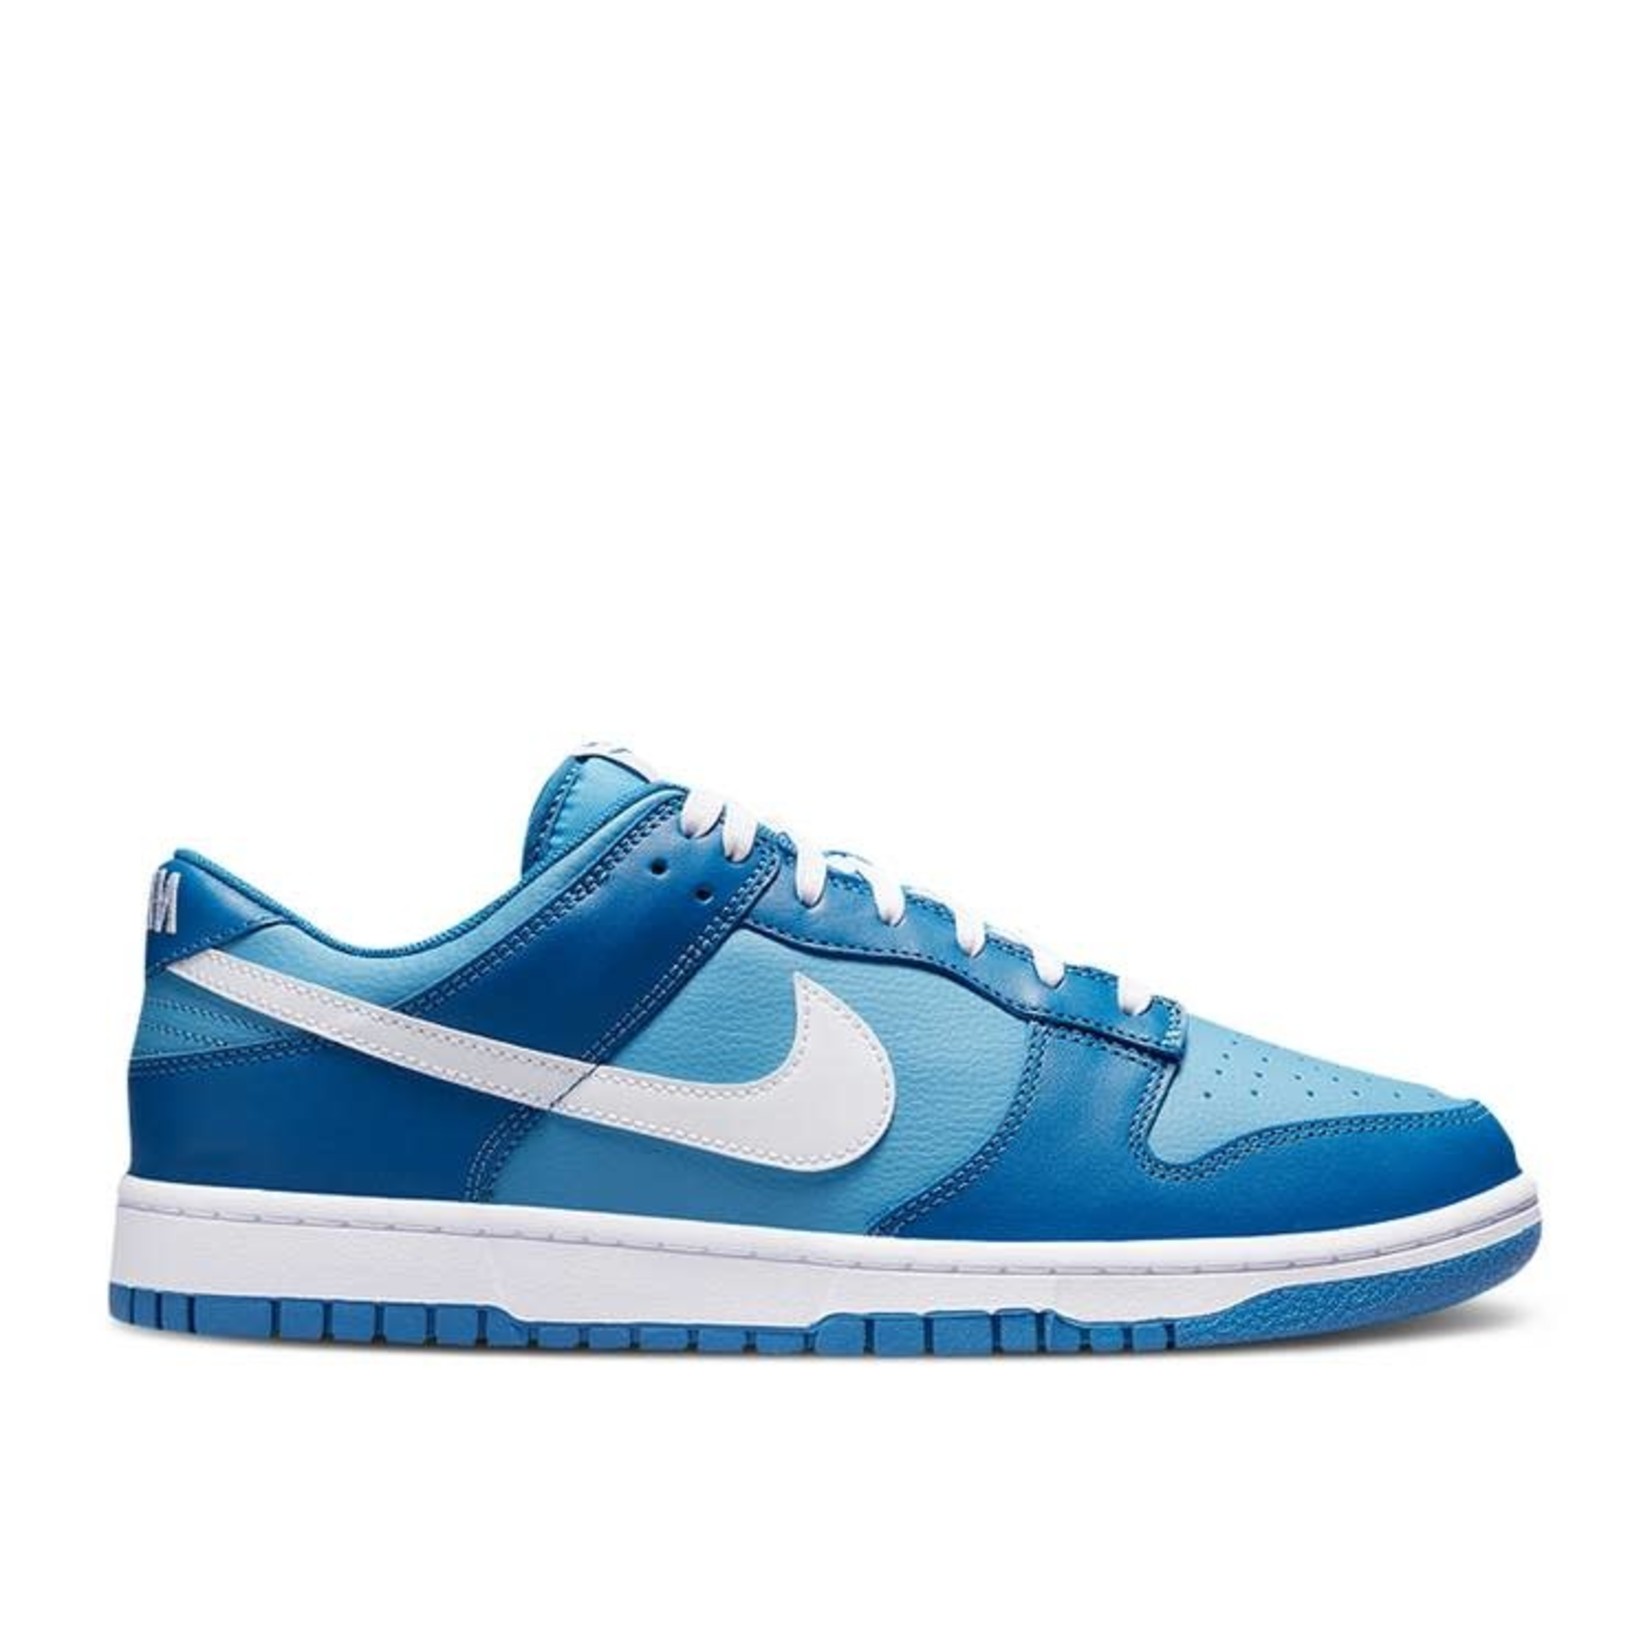 Nike Nike Dunk Low Dark Marina Blue (GS) Size 5Y, DS BRAND NEW